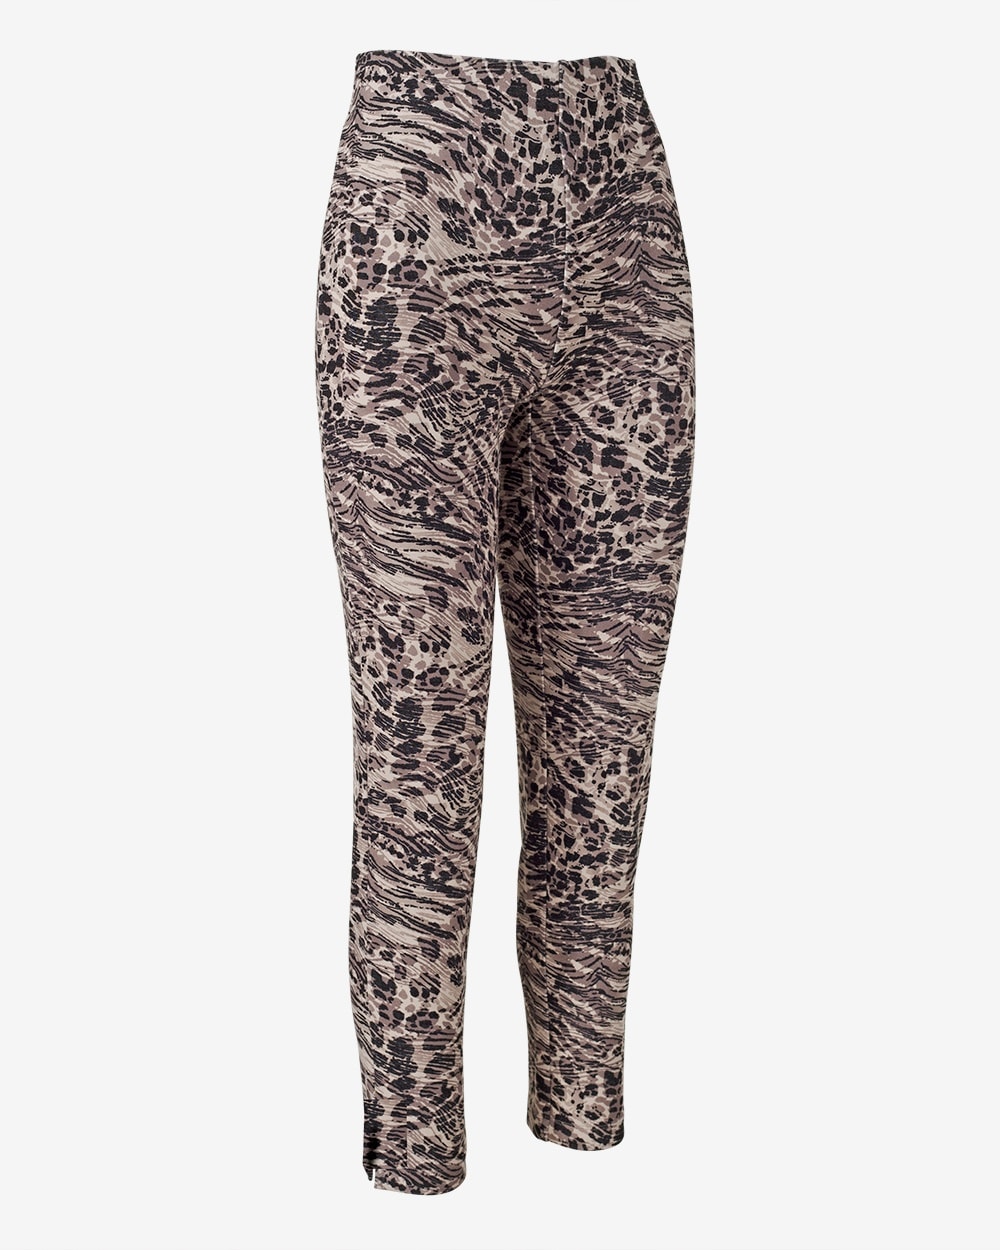 Weekends Passionate Cheetah Double-Knit Pants